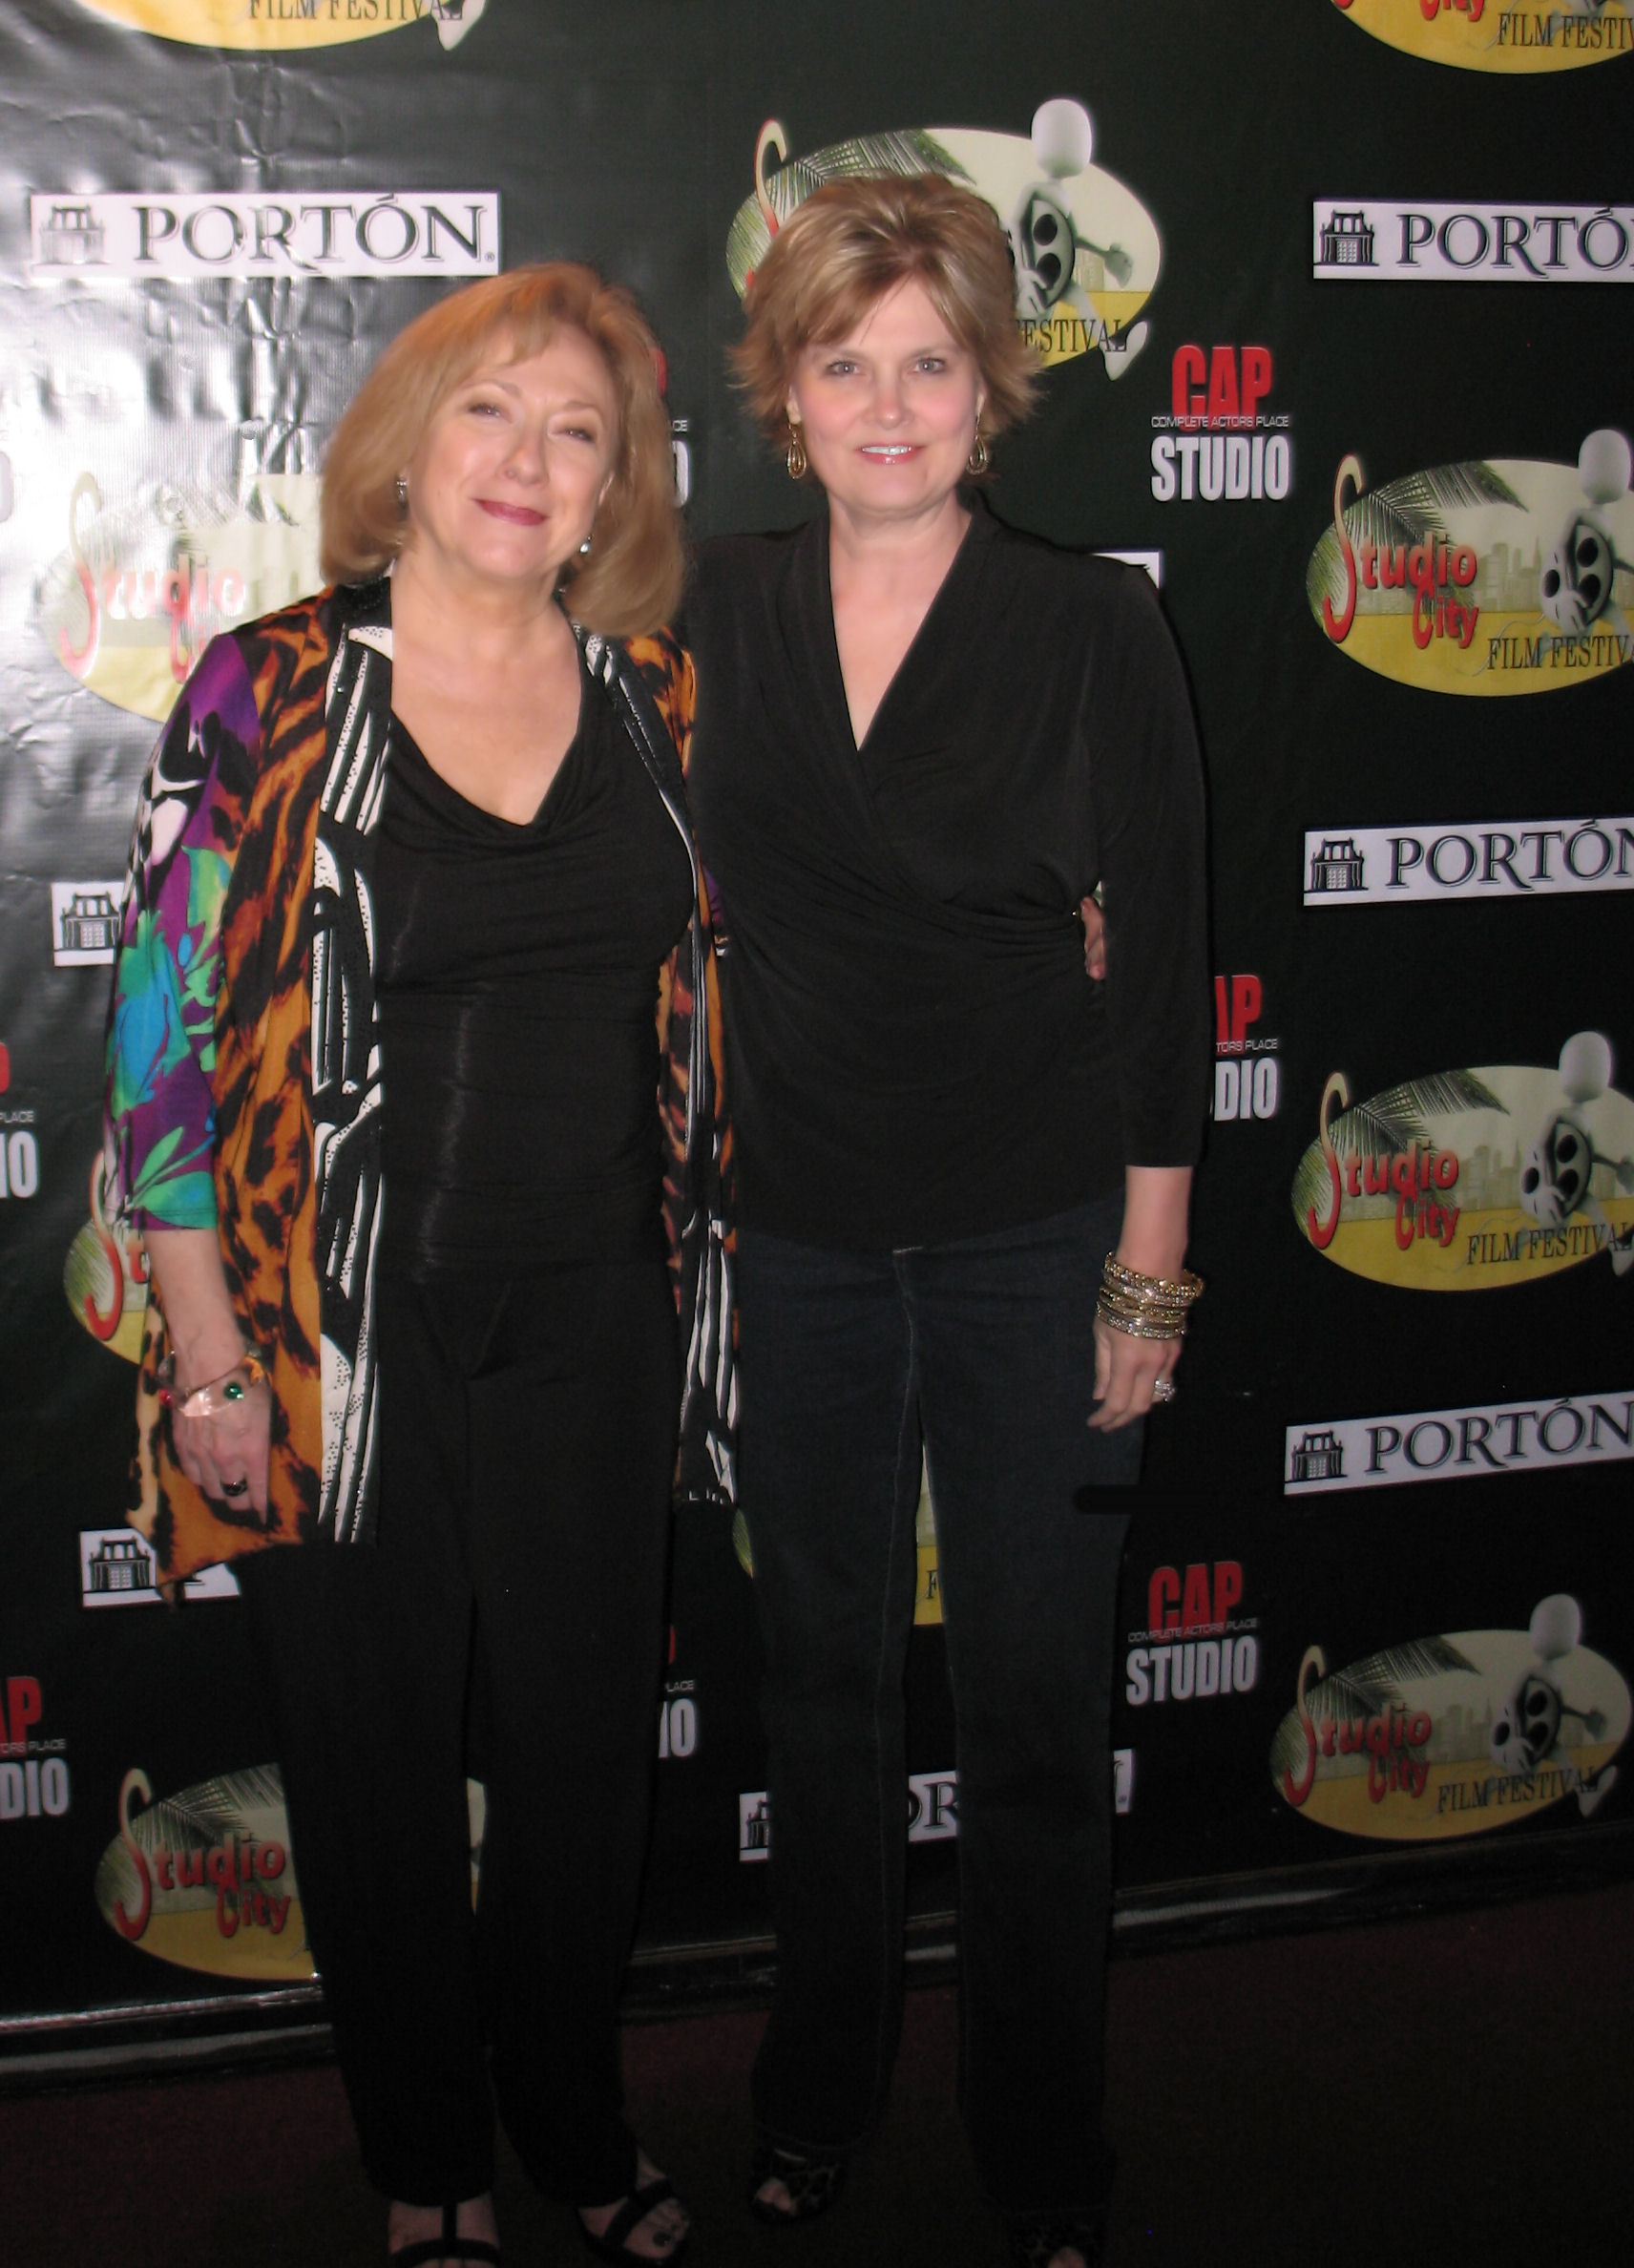 with Sharon Garrison, Executive Producer and Lead Actress in The Painted Woman, short drama